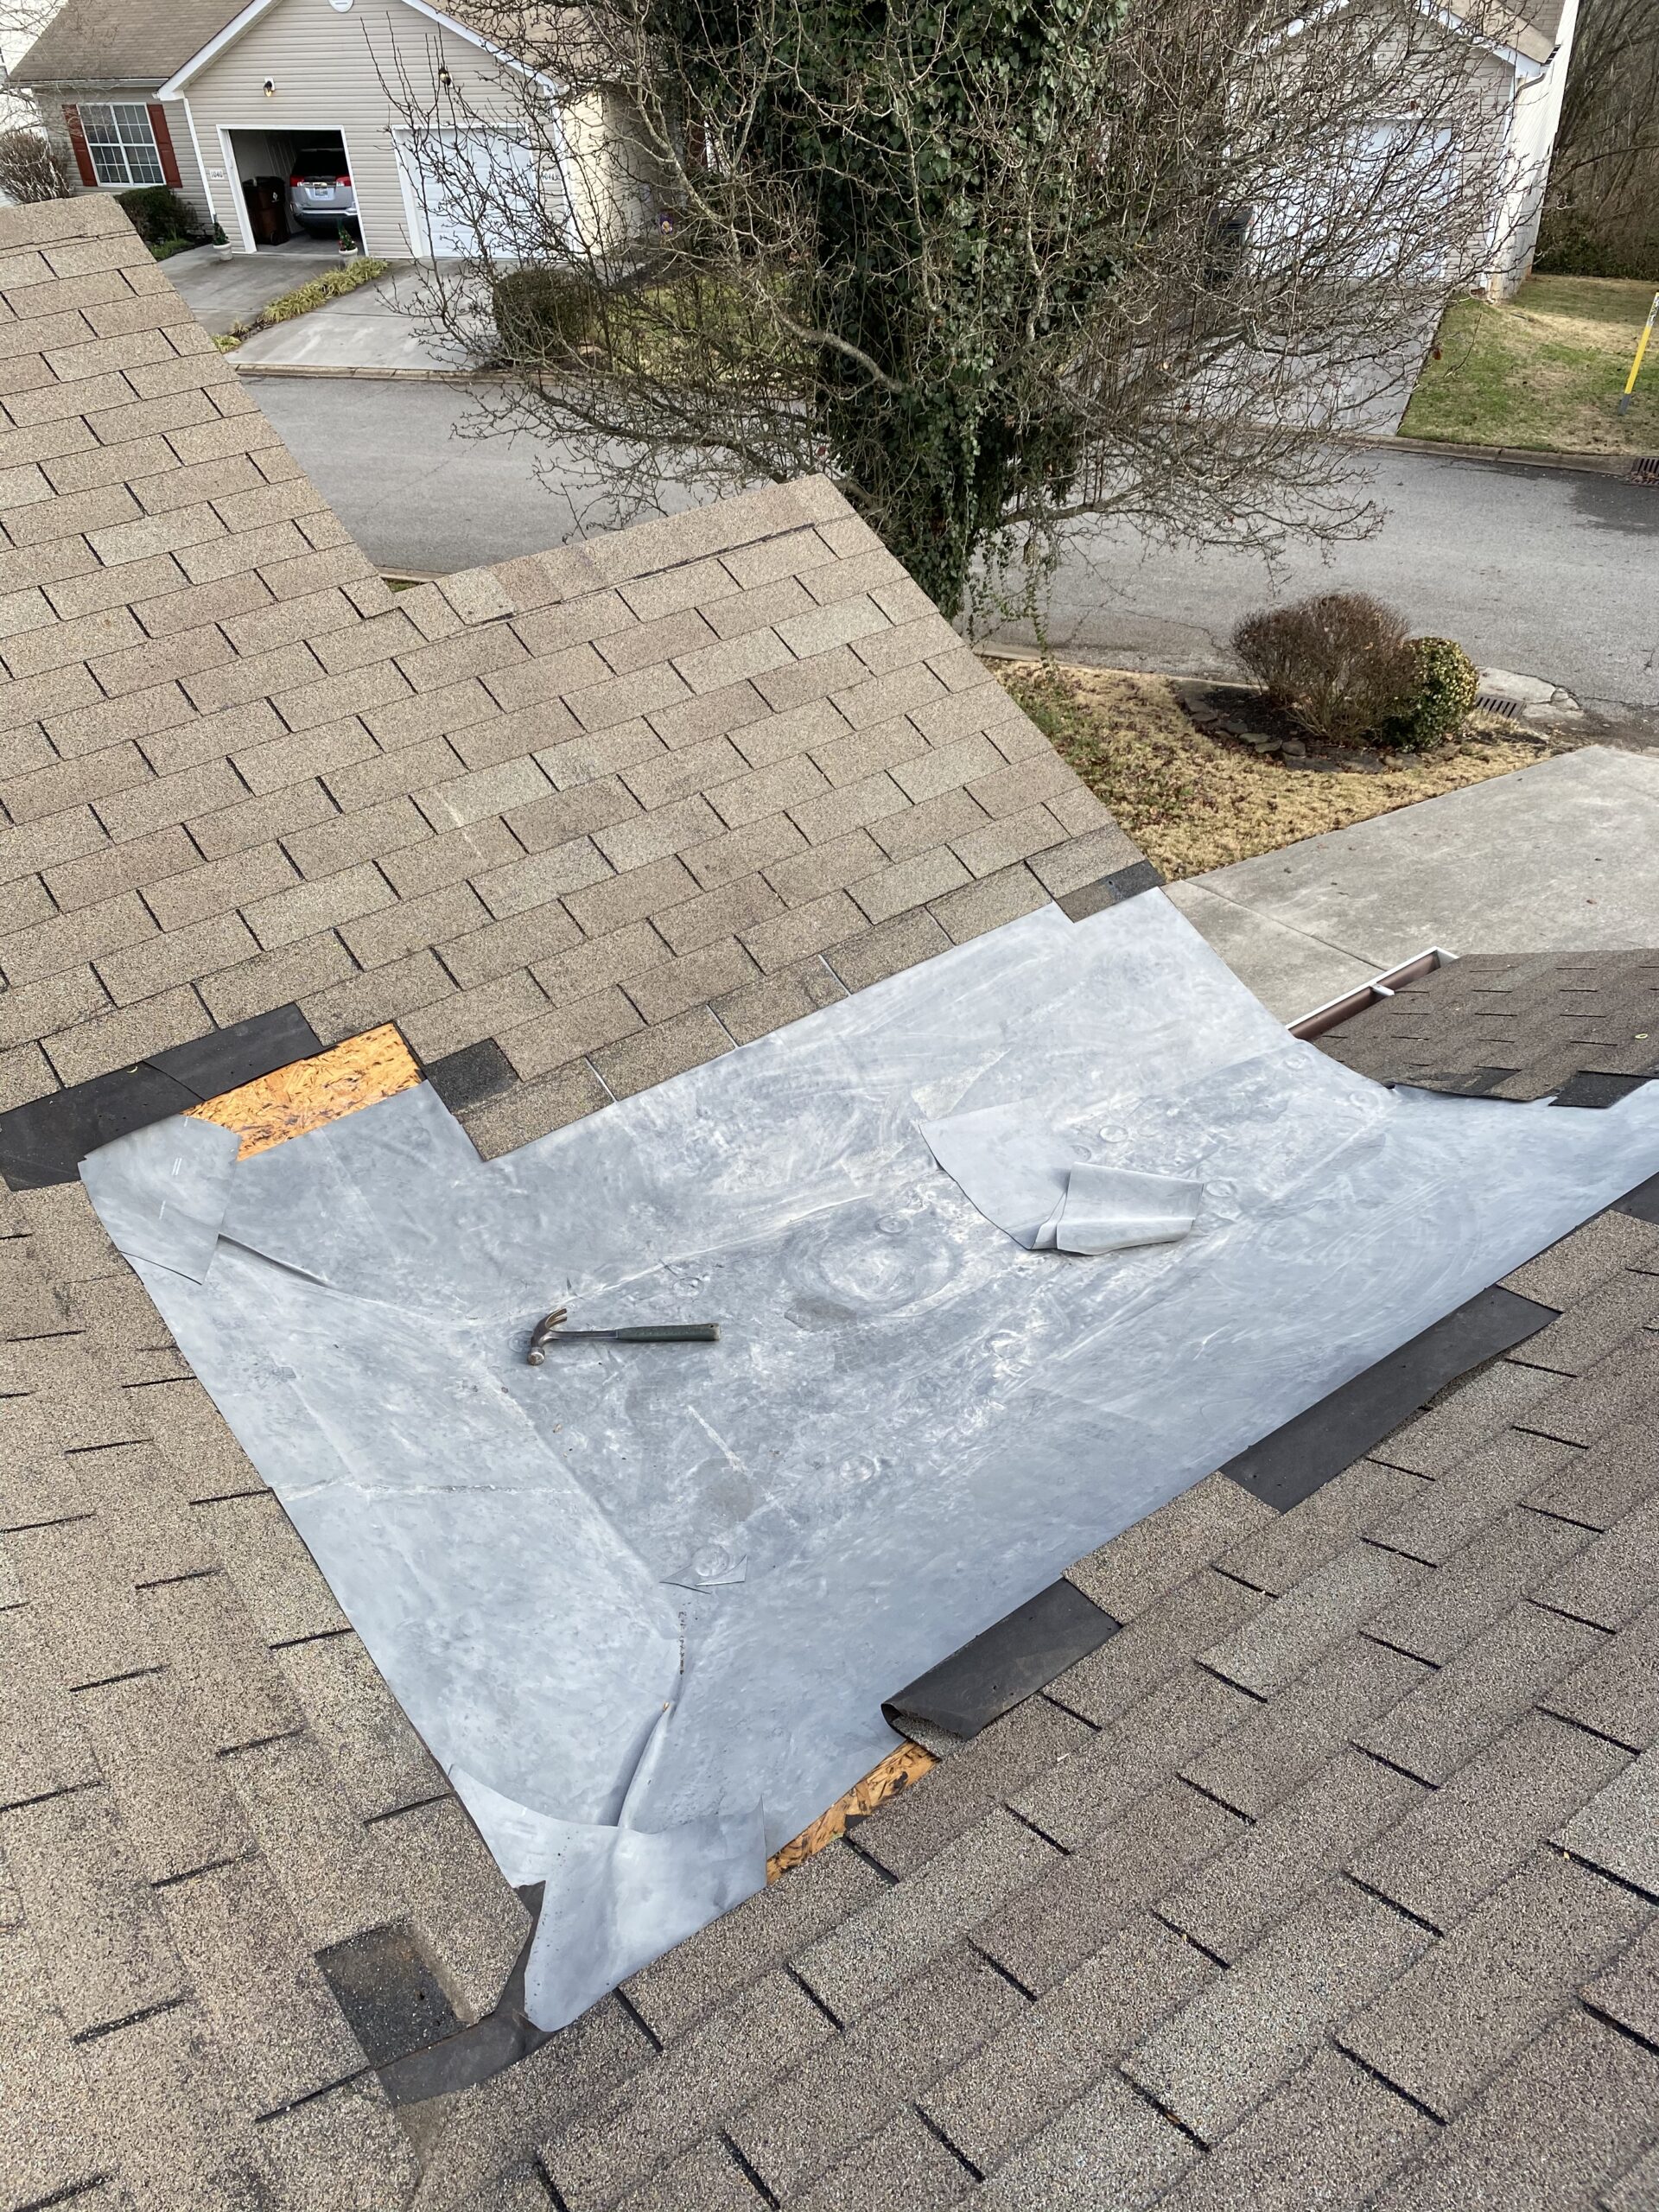 This is a picture of a membrane being laid down instead of shingles for better drainage.